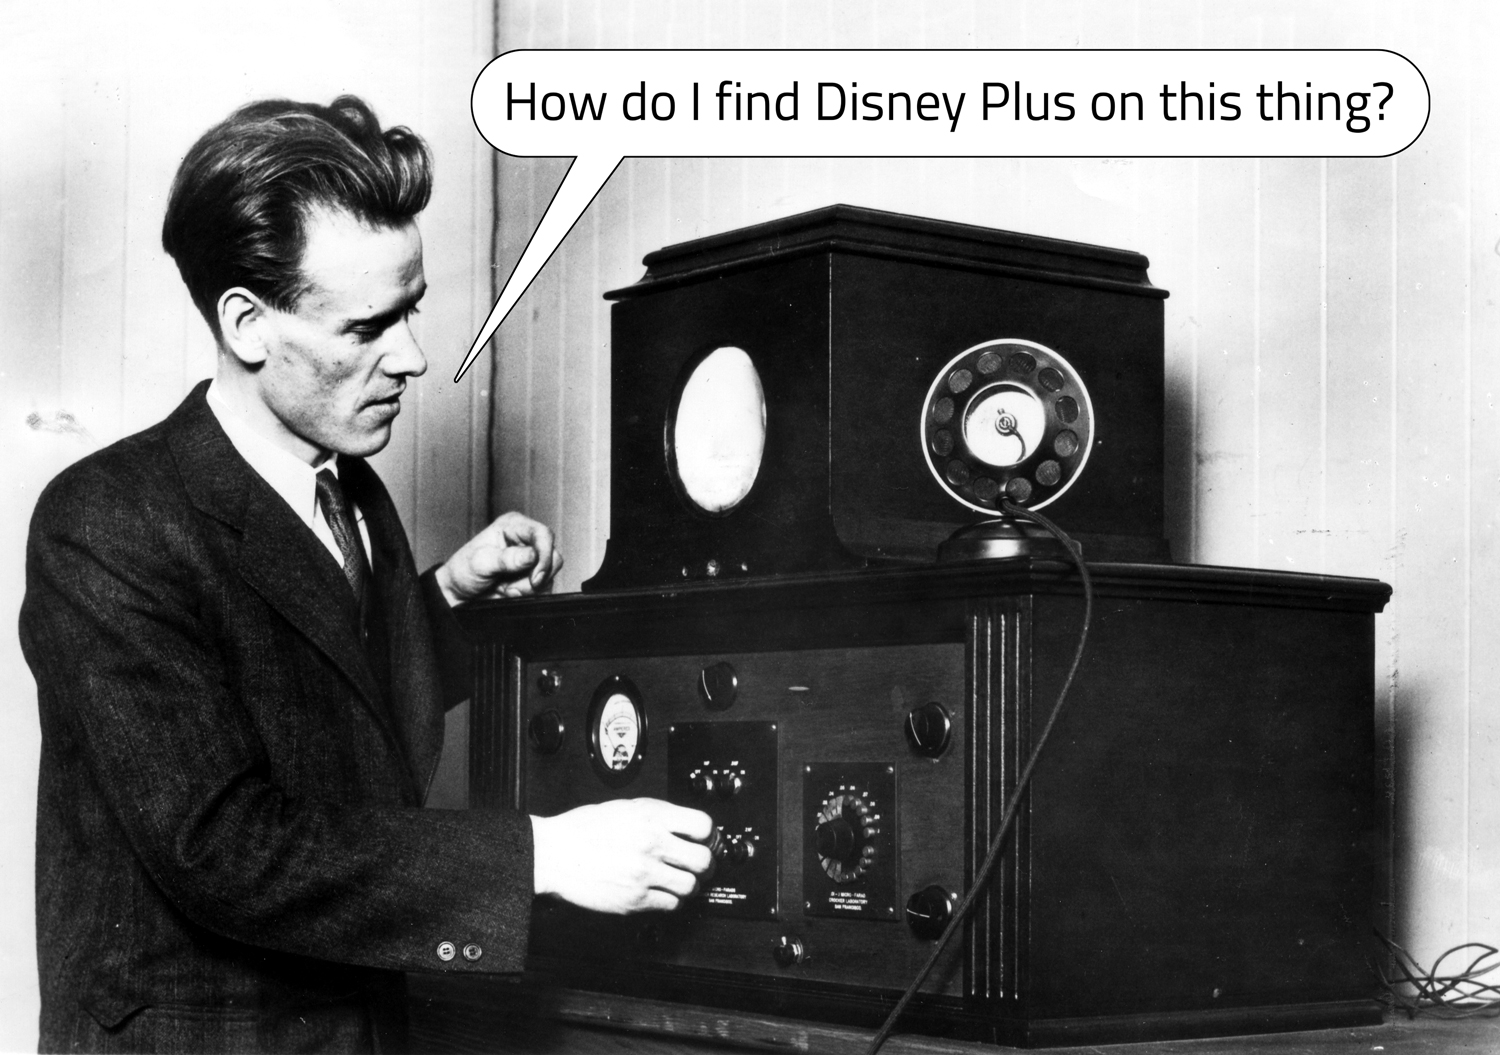 A man touches a dial on a device with various dials and gauges and says how do I find Disney Plus on this thing.